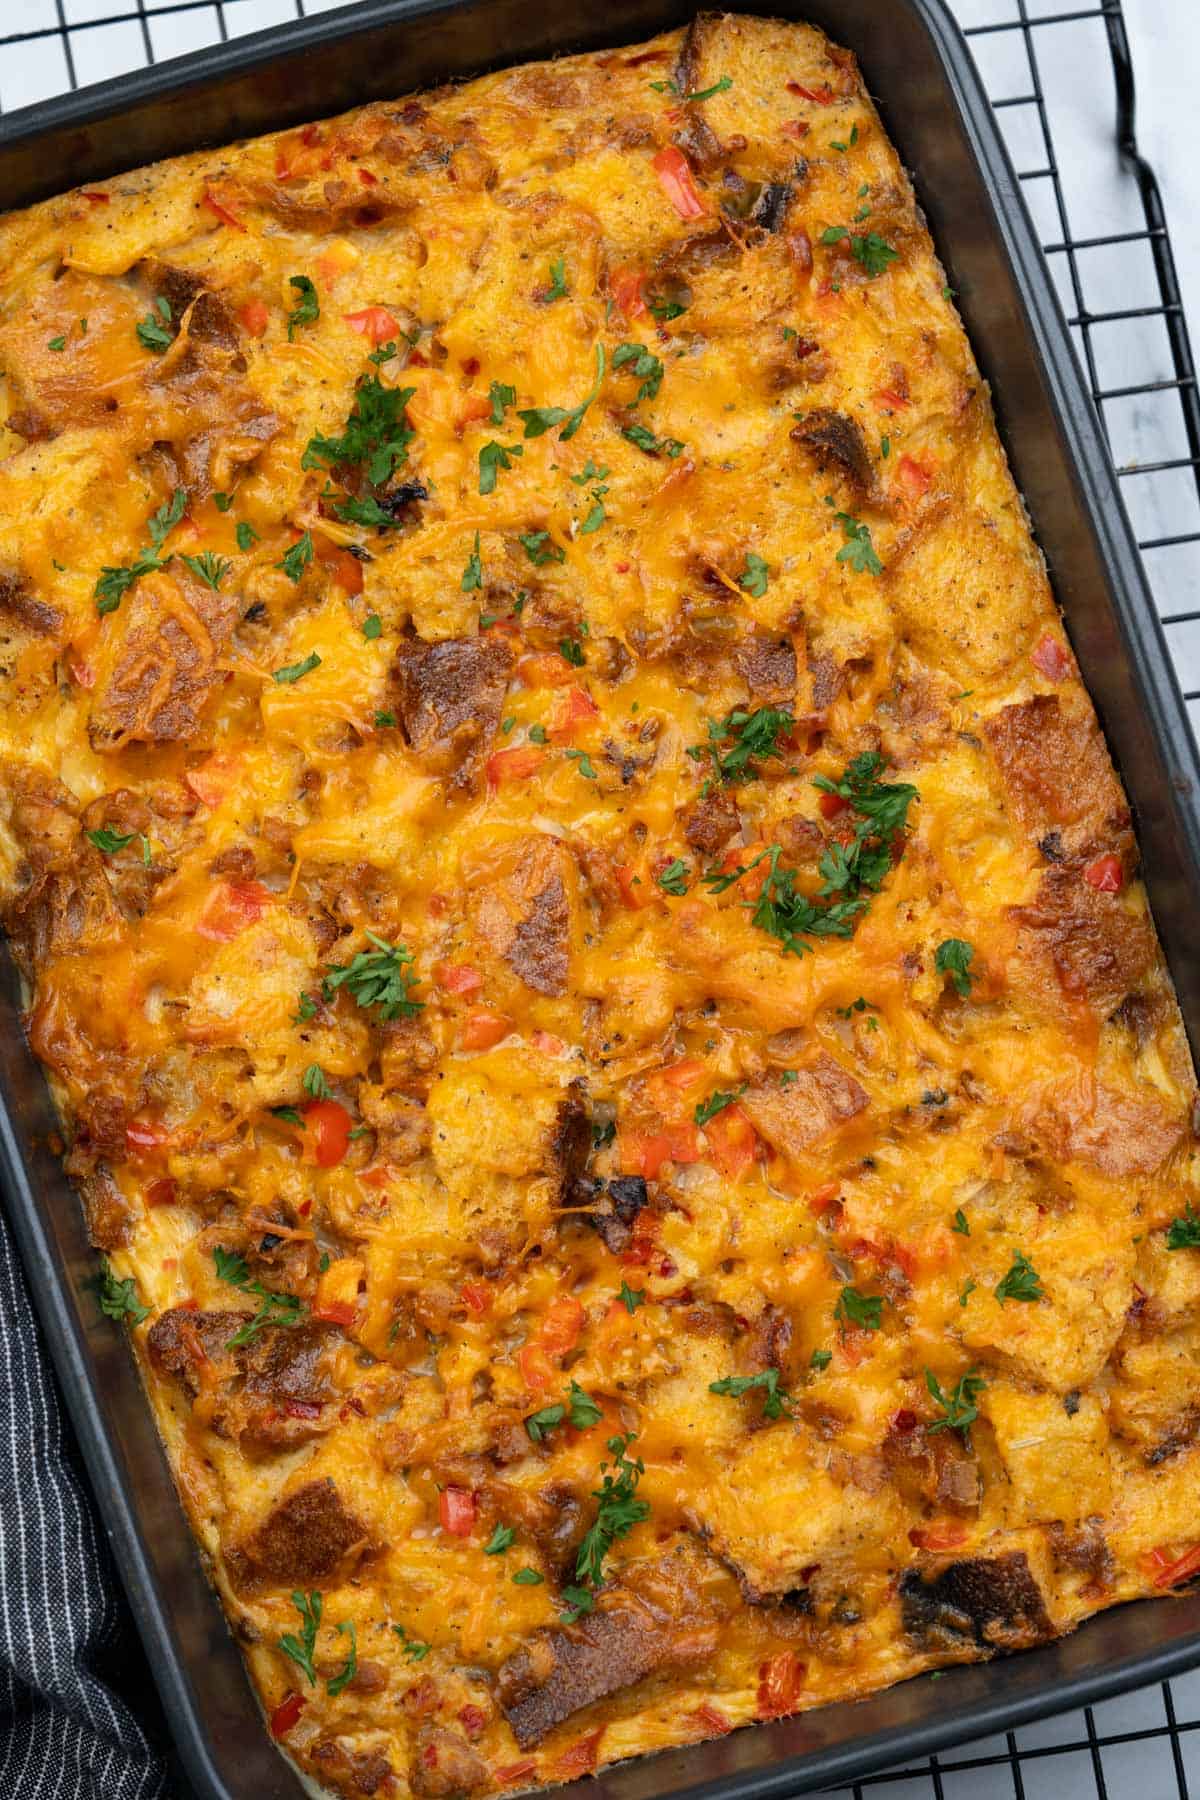 Bread, eggs, sausage and cheddar cheese baked into a casserole. This breakfast is filling and delicious.